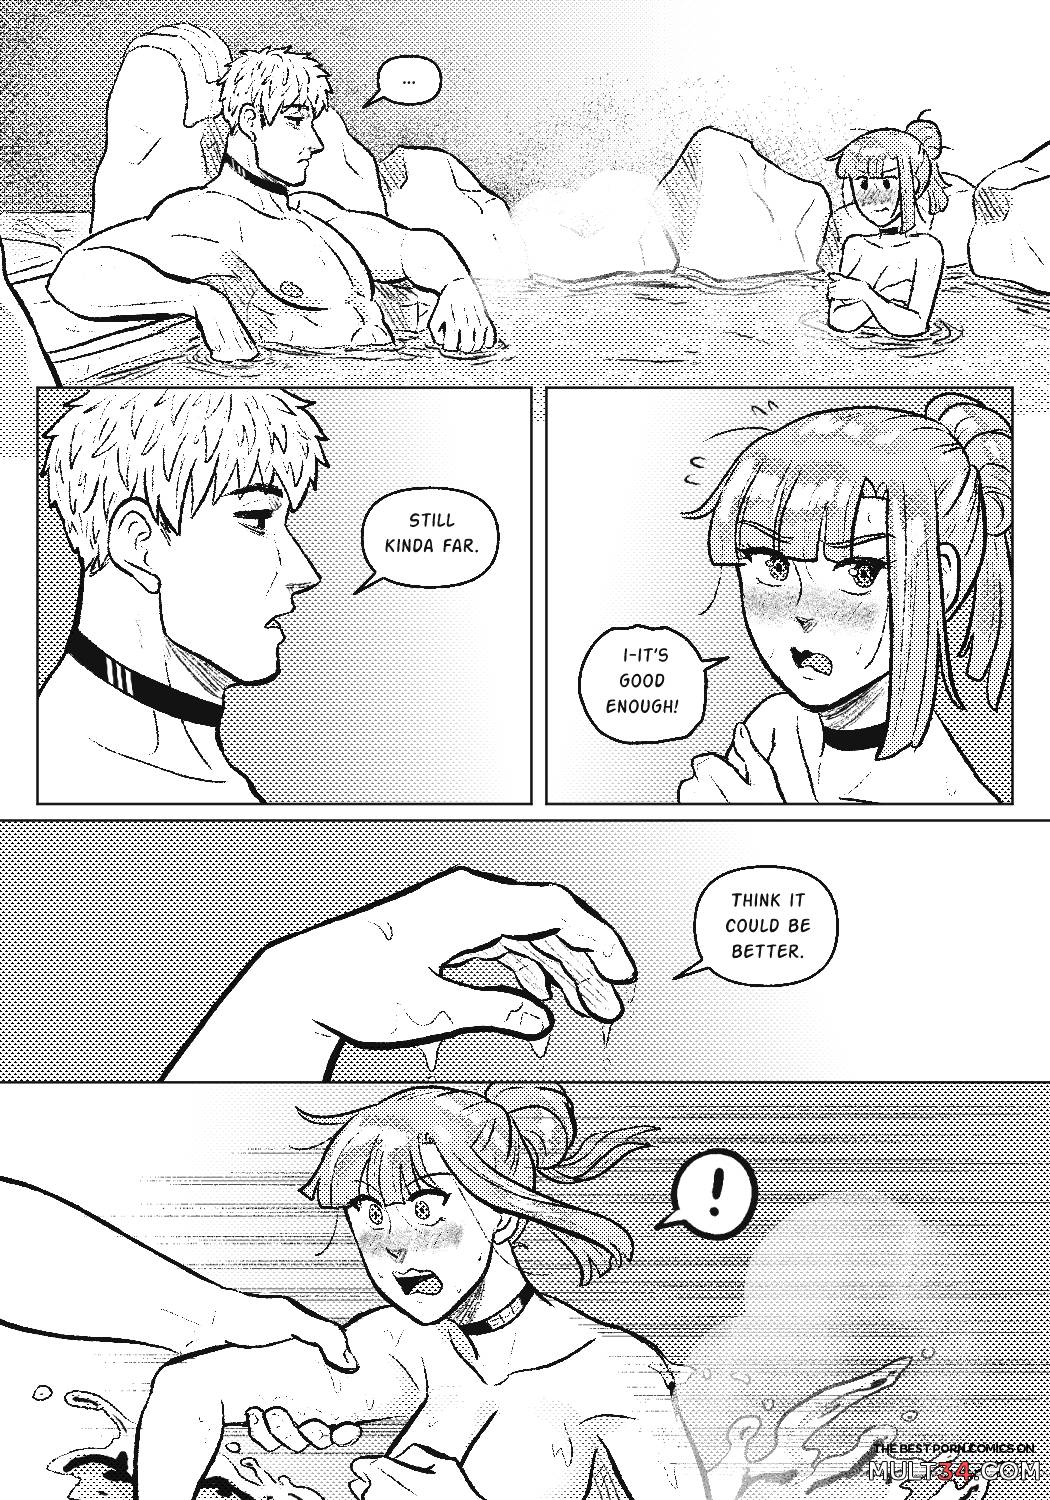 Bathing Ordeal page 6